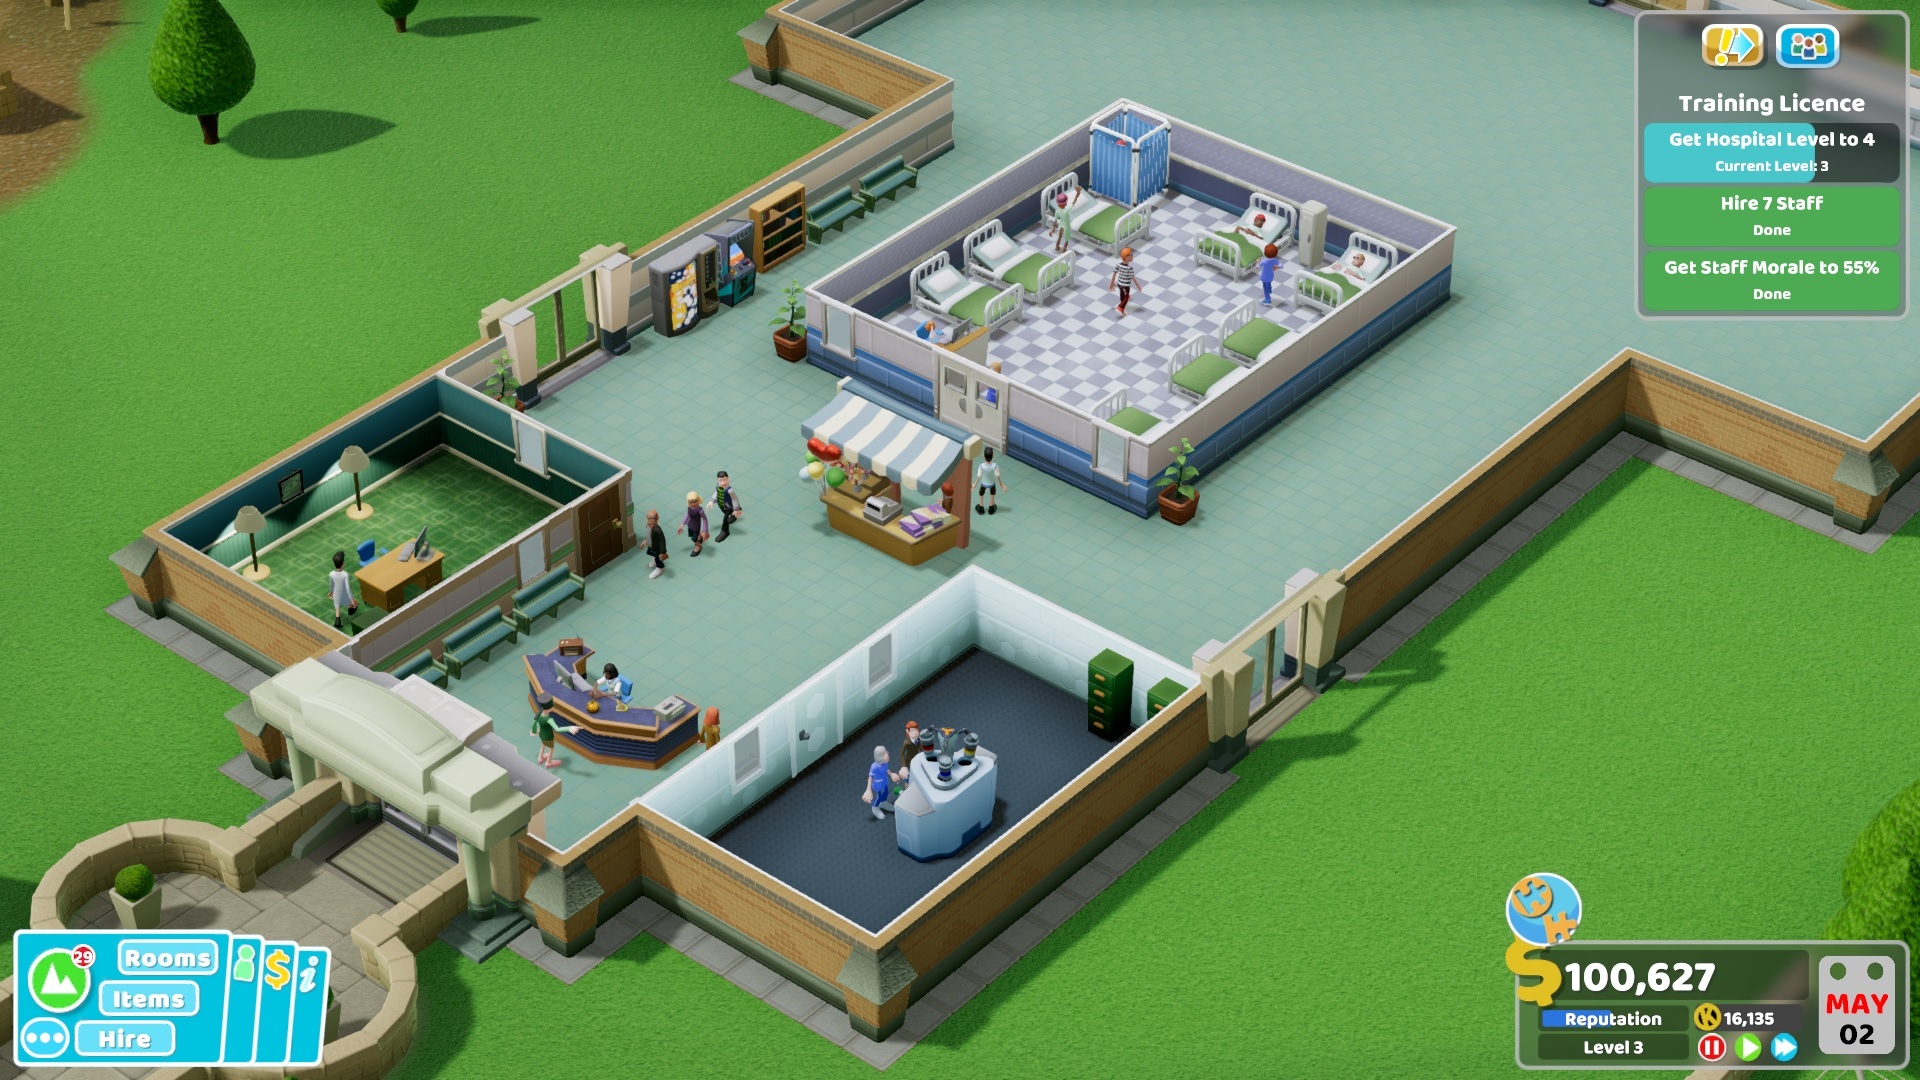 free download two point hospital steam